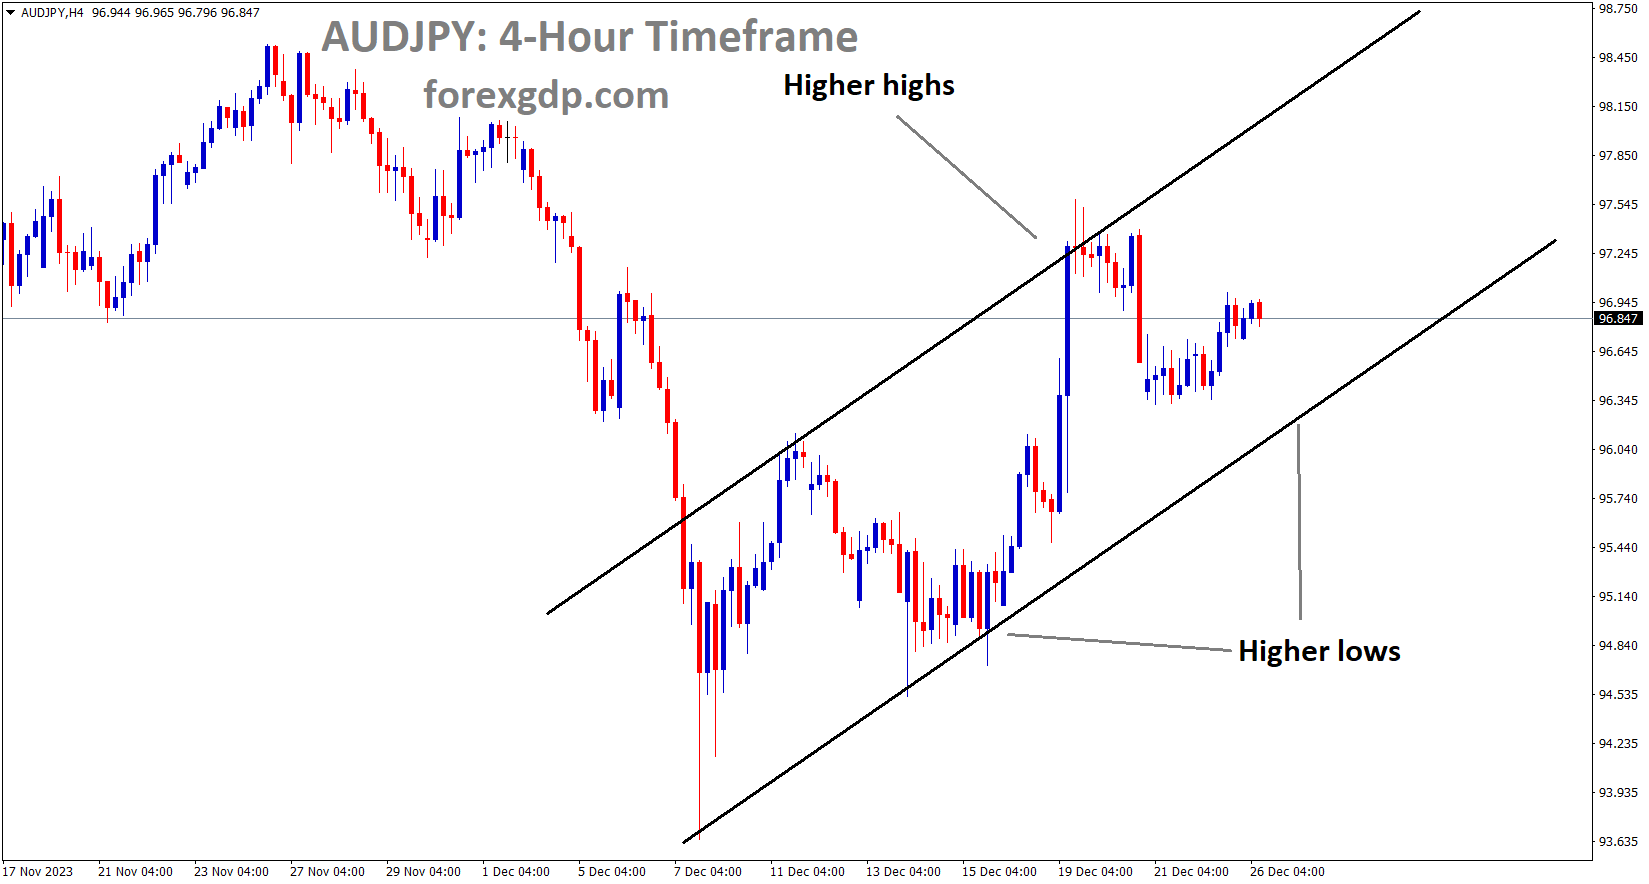 AUDJPY is moving in an Ascending channel and the market has reached the higher low area of the channel